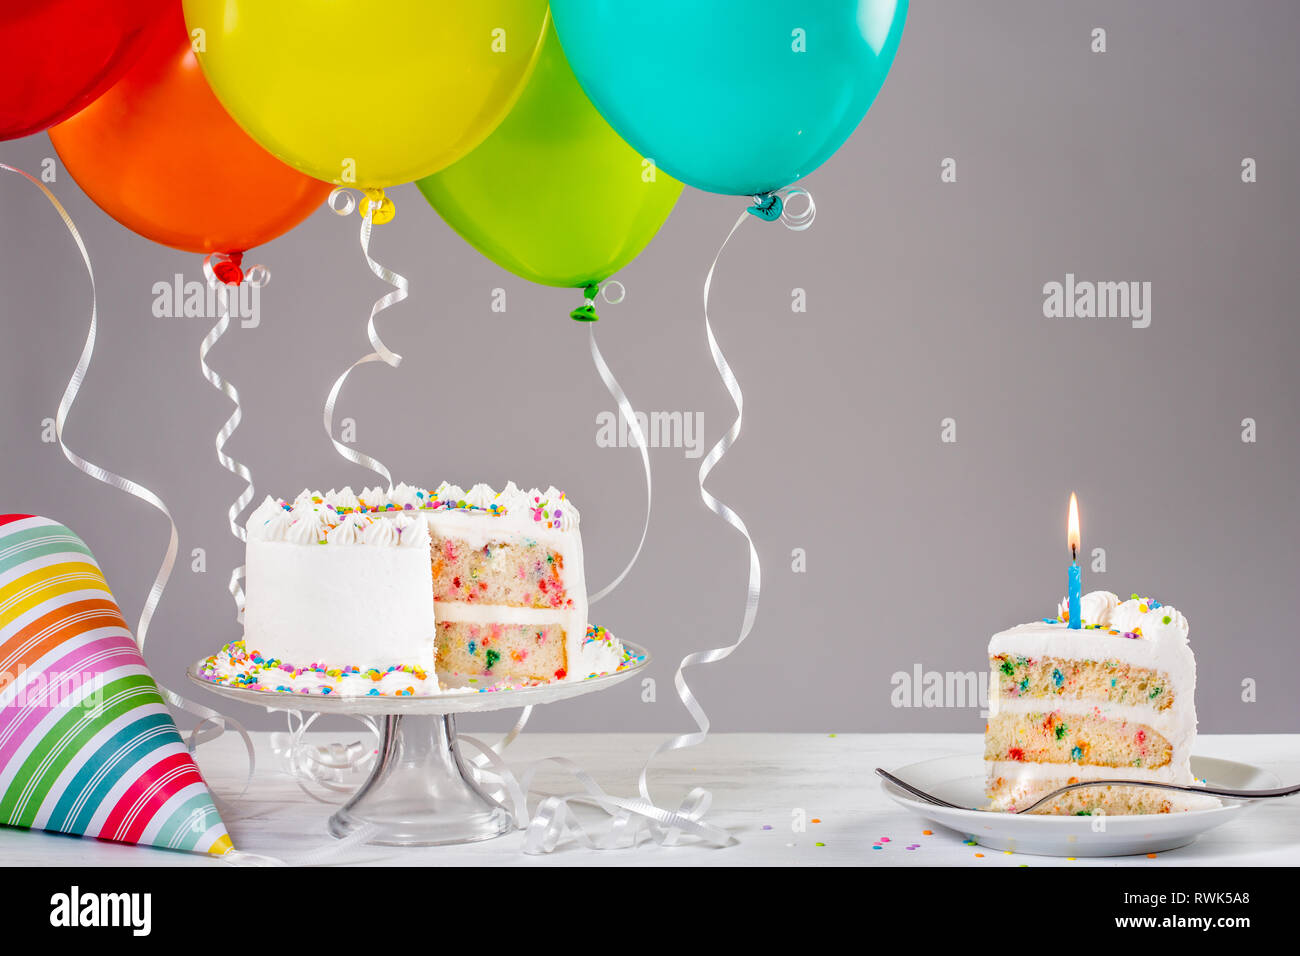 White Buttercream birthday cake with colorful balloons and hat. Stock Photo